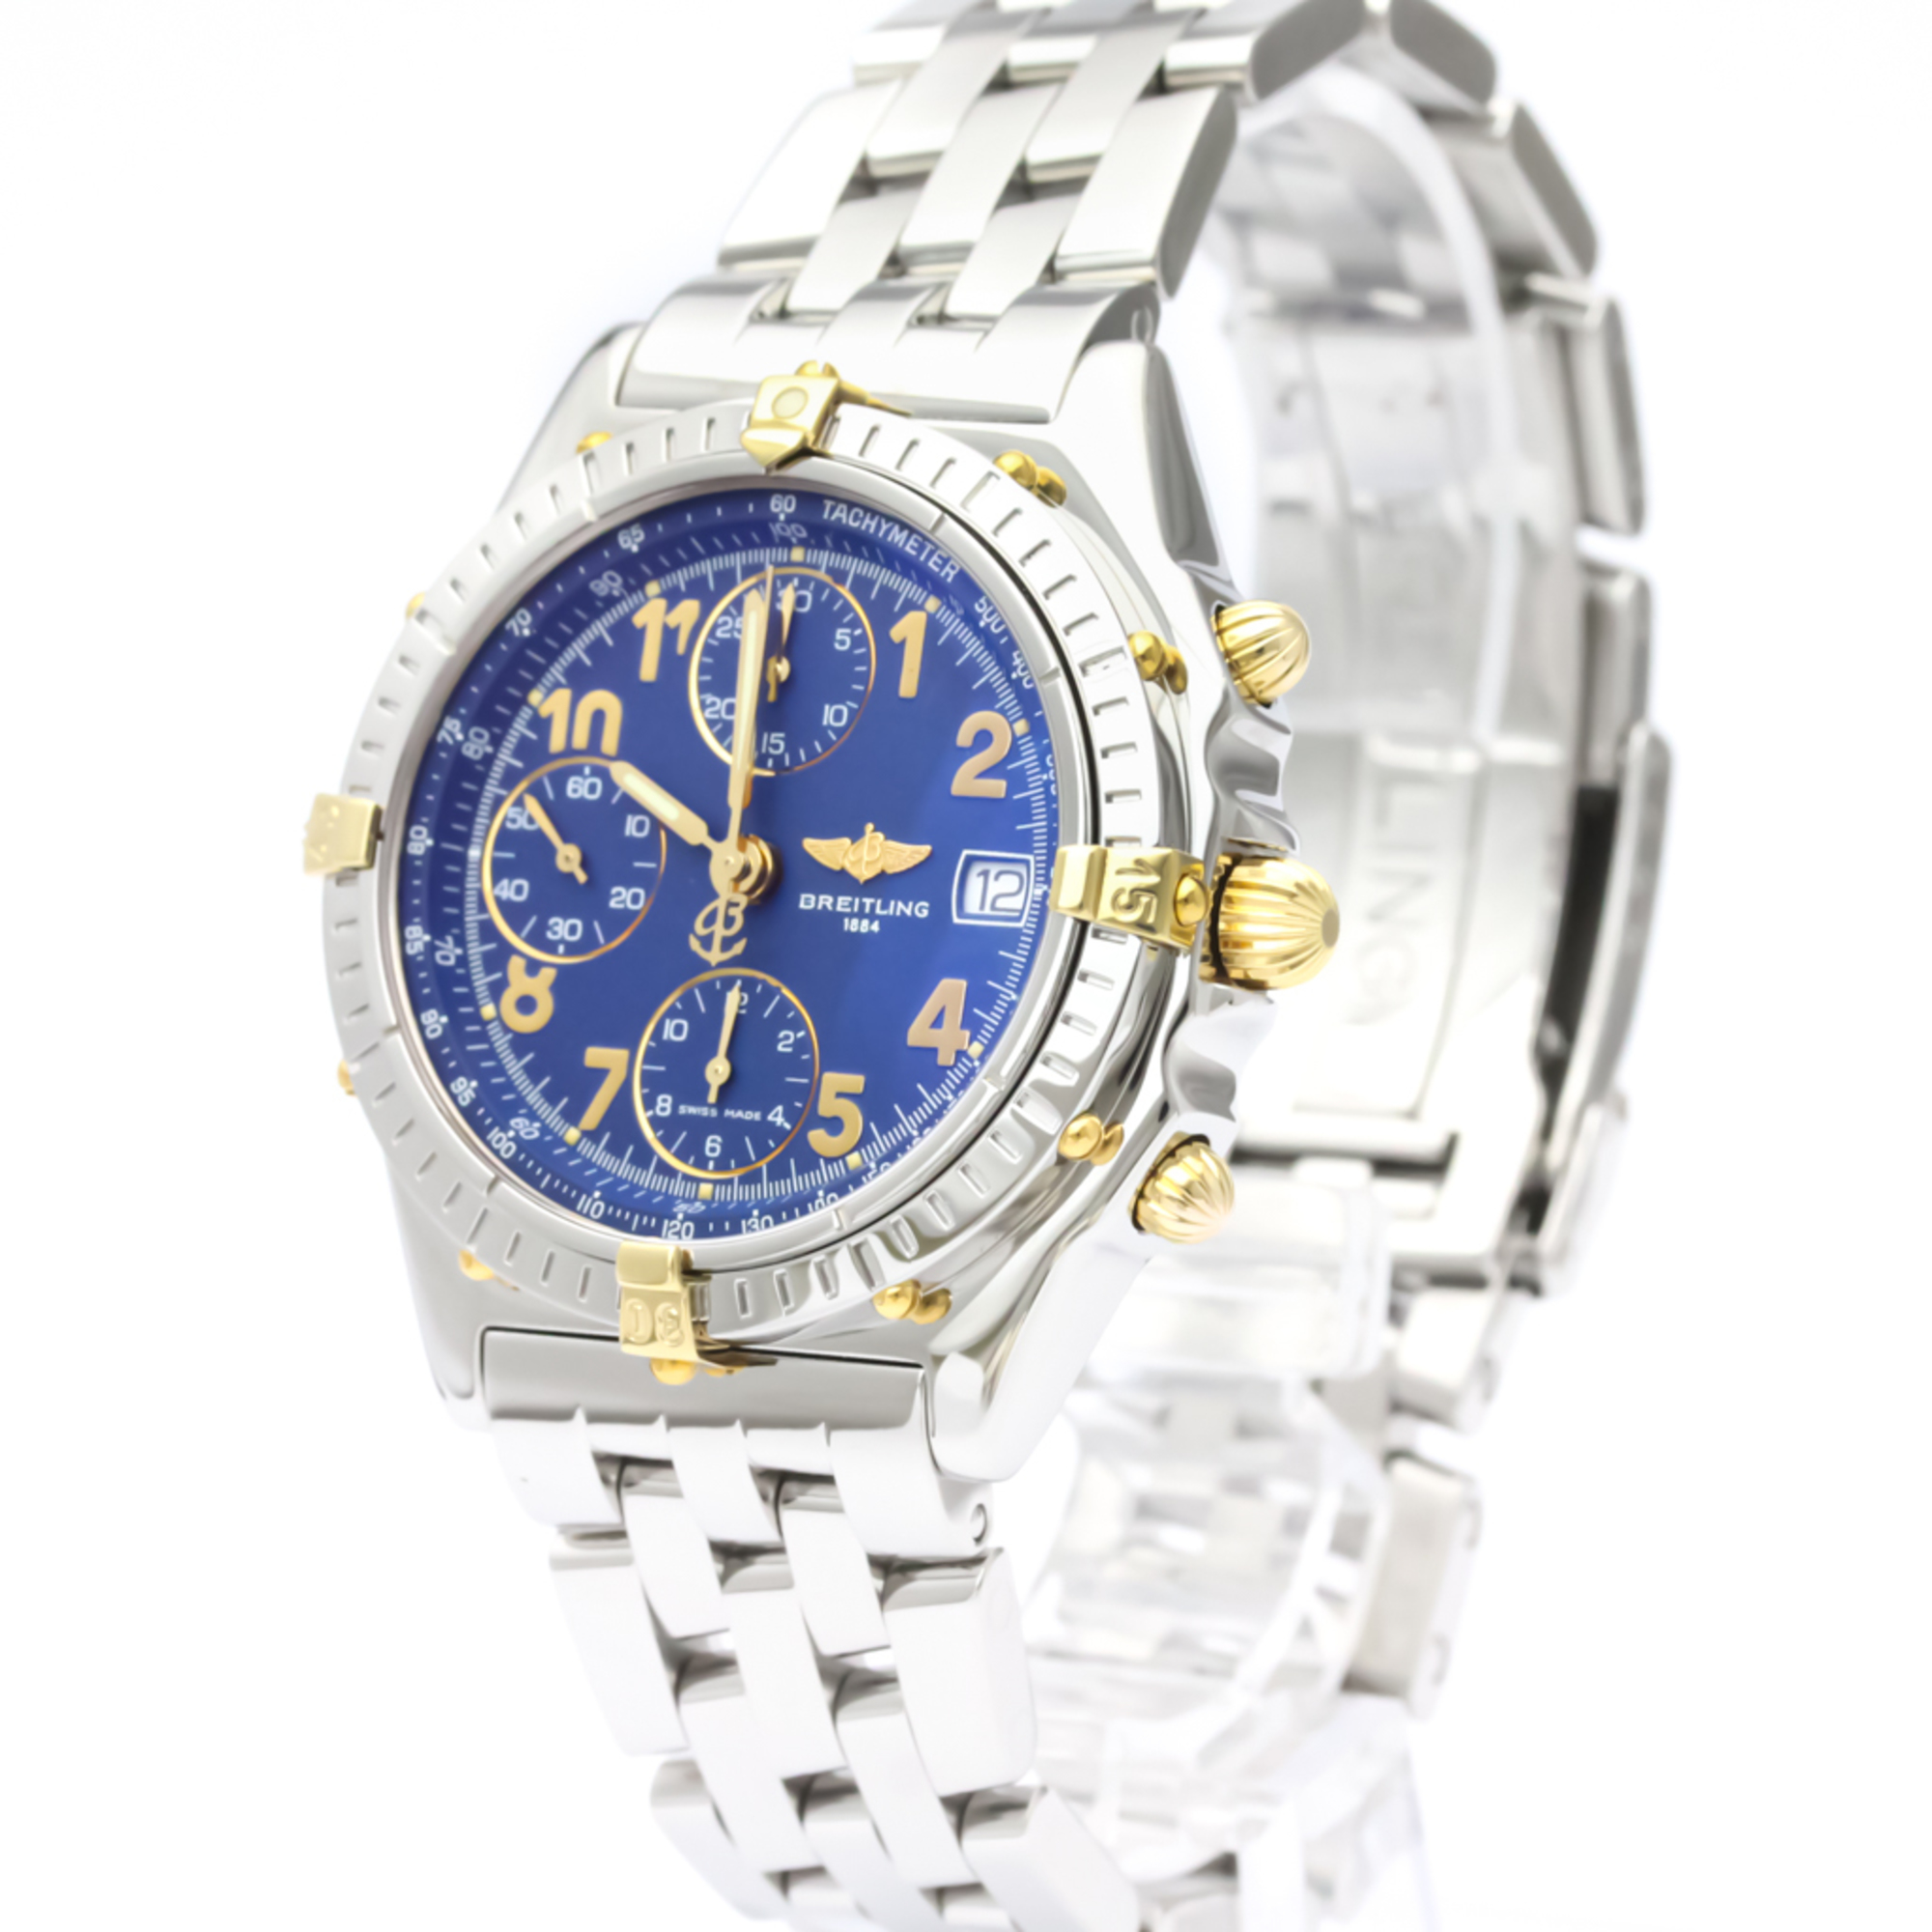 Breitling Chronomat Automatic Stainless Steel,Yellow Gold (18K) Men's Sports Watch B13050.1